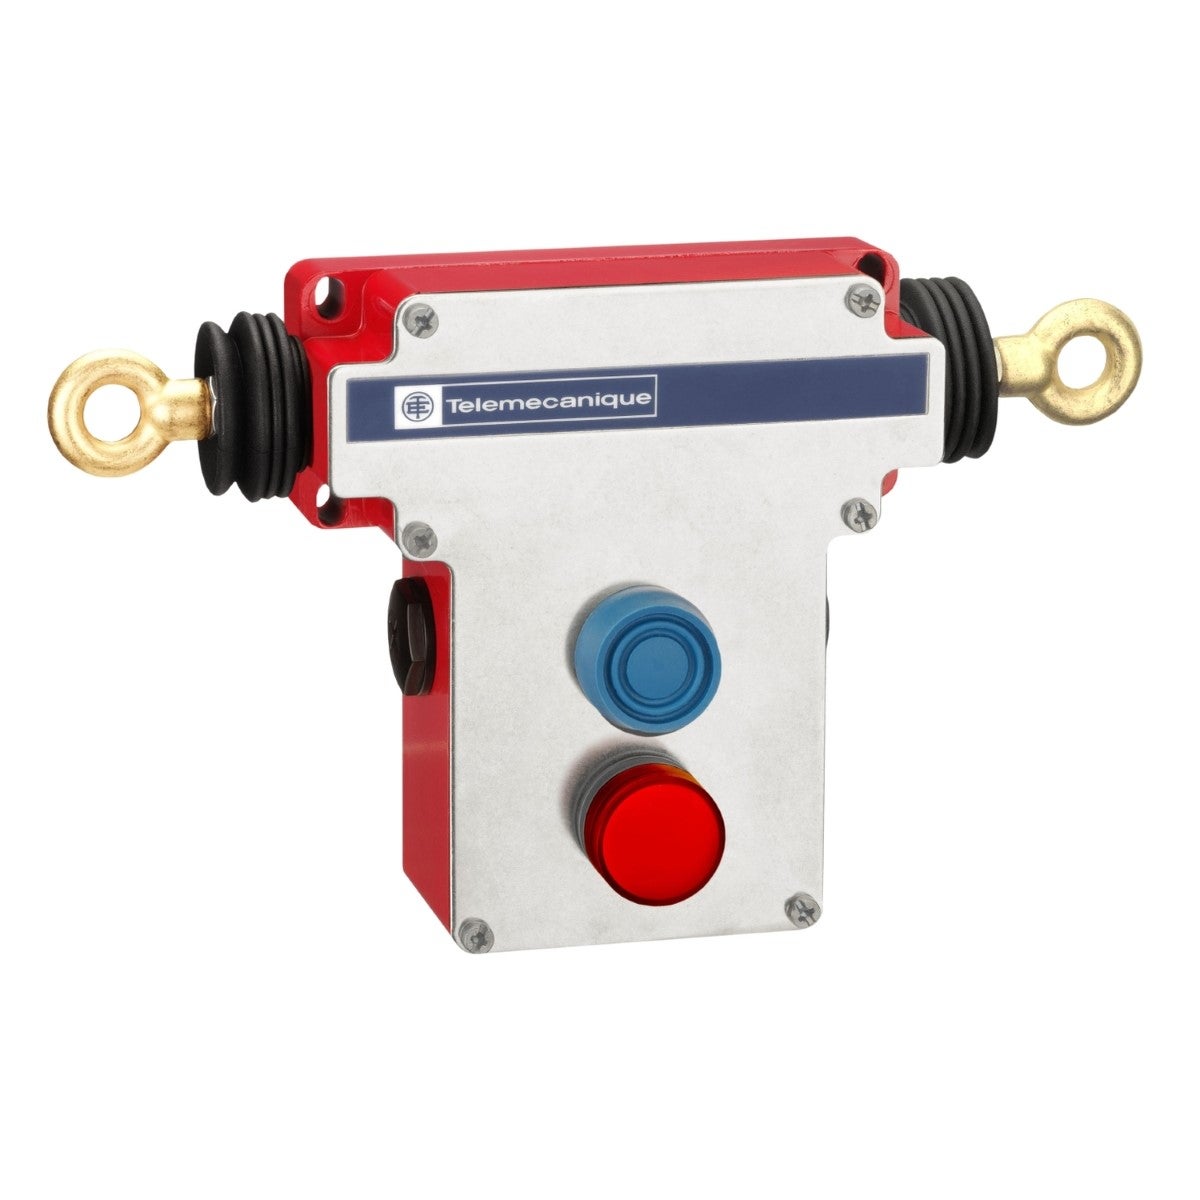 Dual emergency stop rope pull switch, Telemecanique rope pull switches XY2C, e 2x(1NC+1NO), 1/2